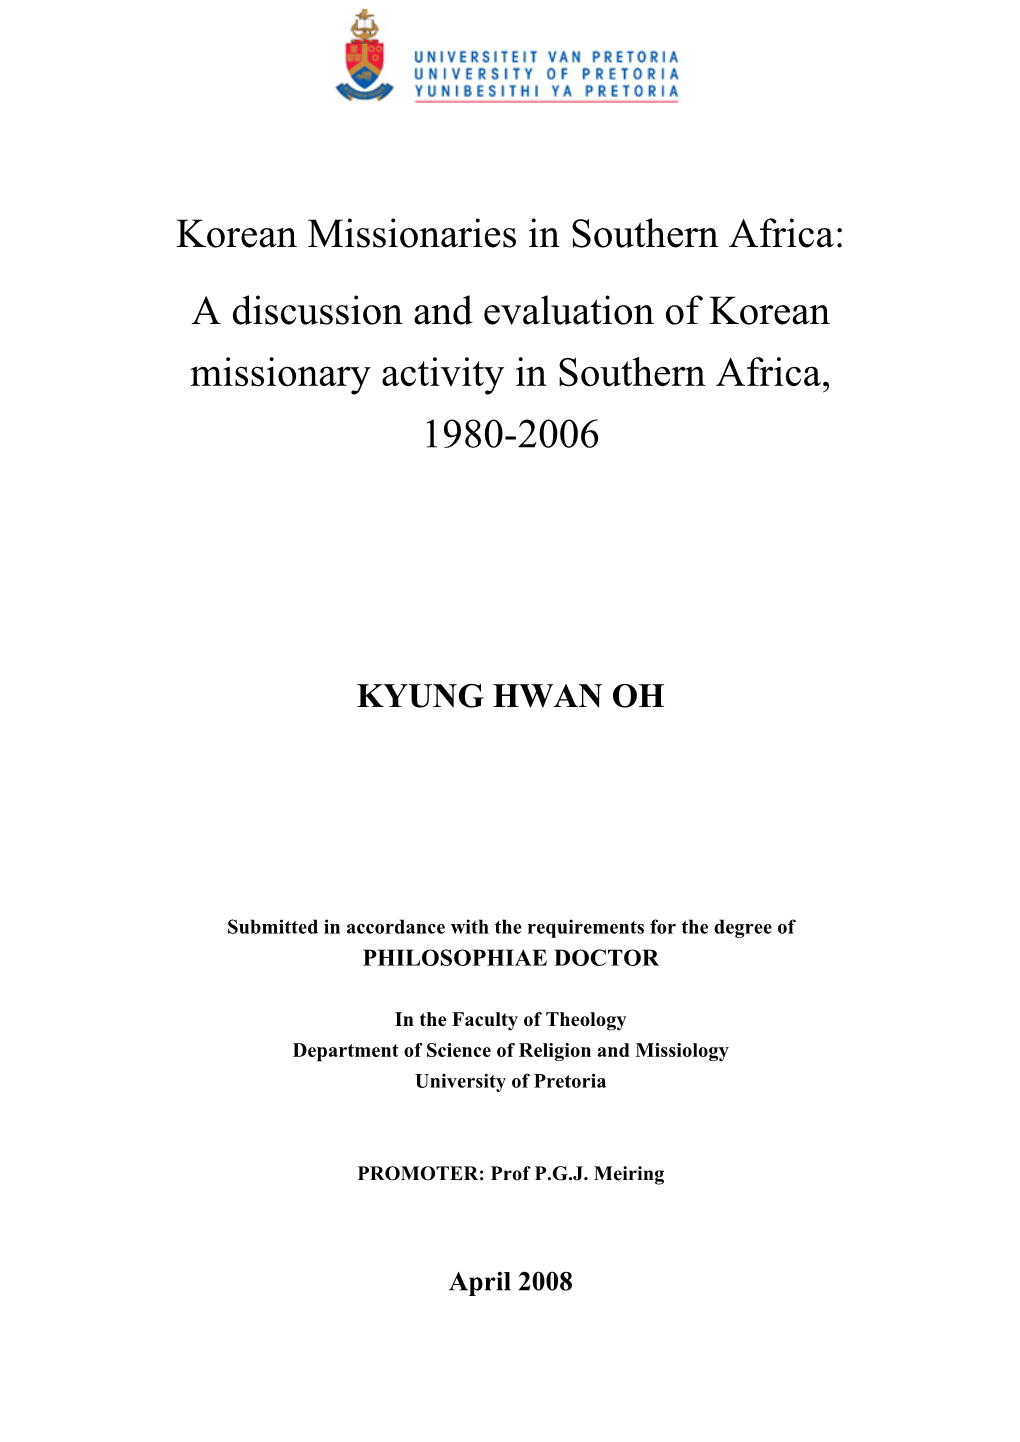 Korean Missionaries in Southern Africa: a Discussion and Evaluation of Korean Missionary Activity in Southern Africa, 1980-2006